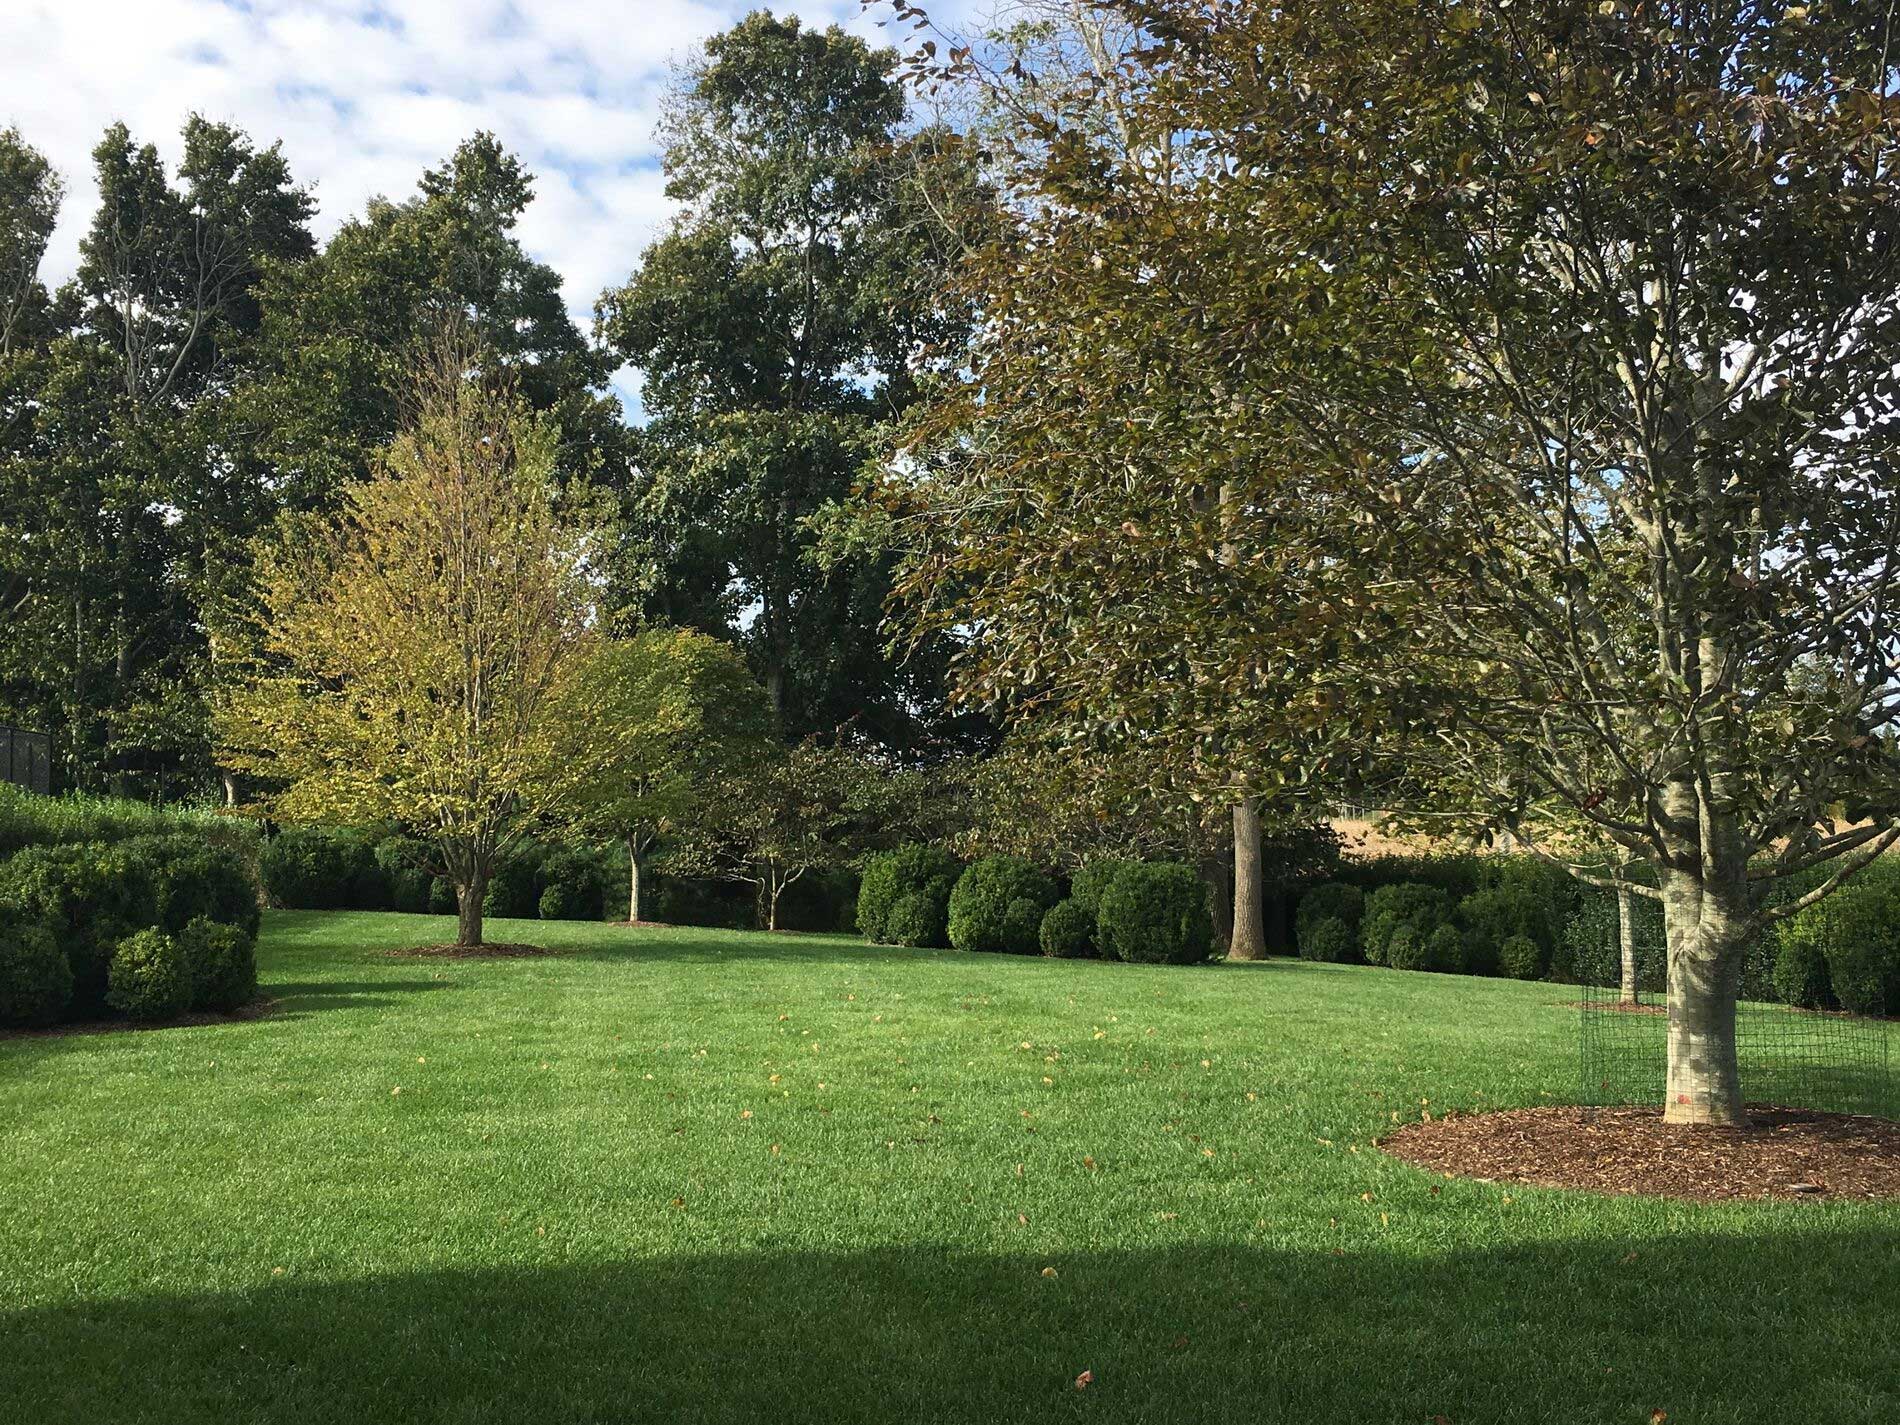 The front garden incorporates a variety of specimen trees; in addition to the European Beech there are Yellowwood, Katsura Tree, and Forest Pansy Redbud. Clumps of Boxwood are planted in drifts as an understory.